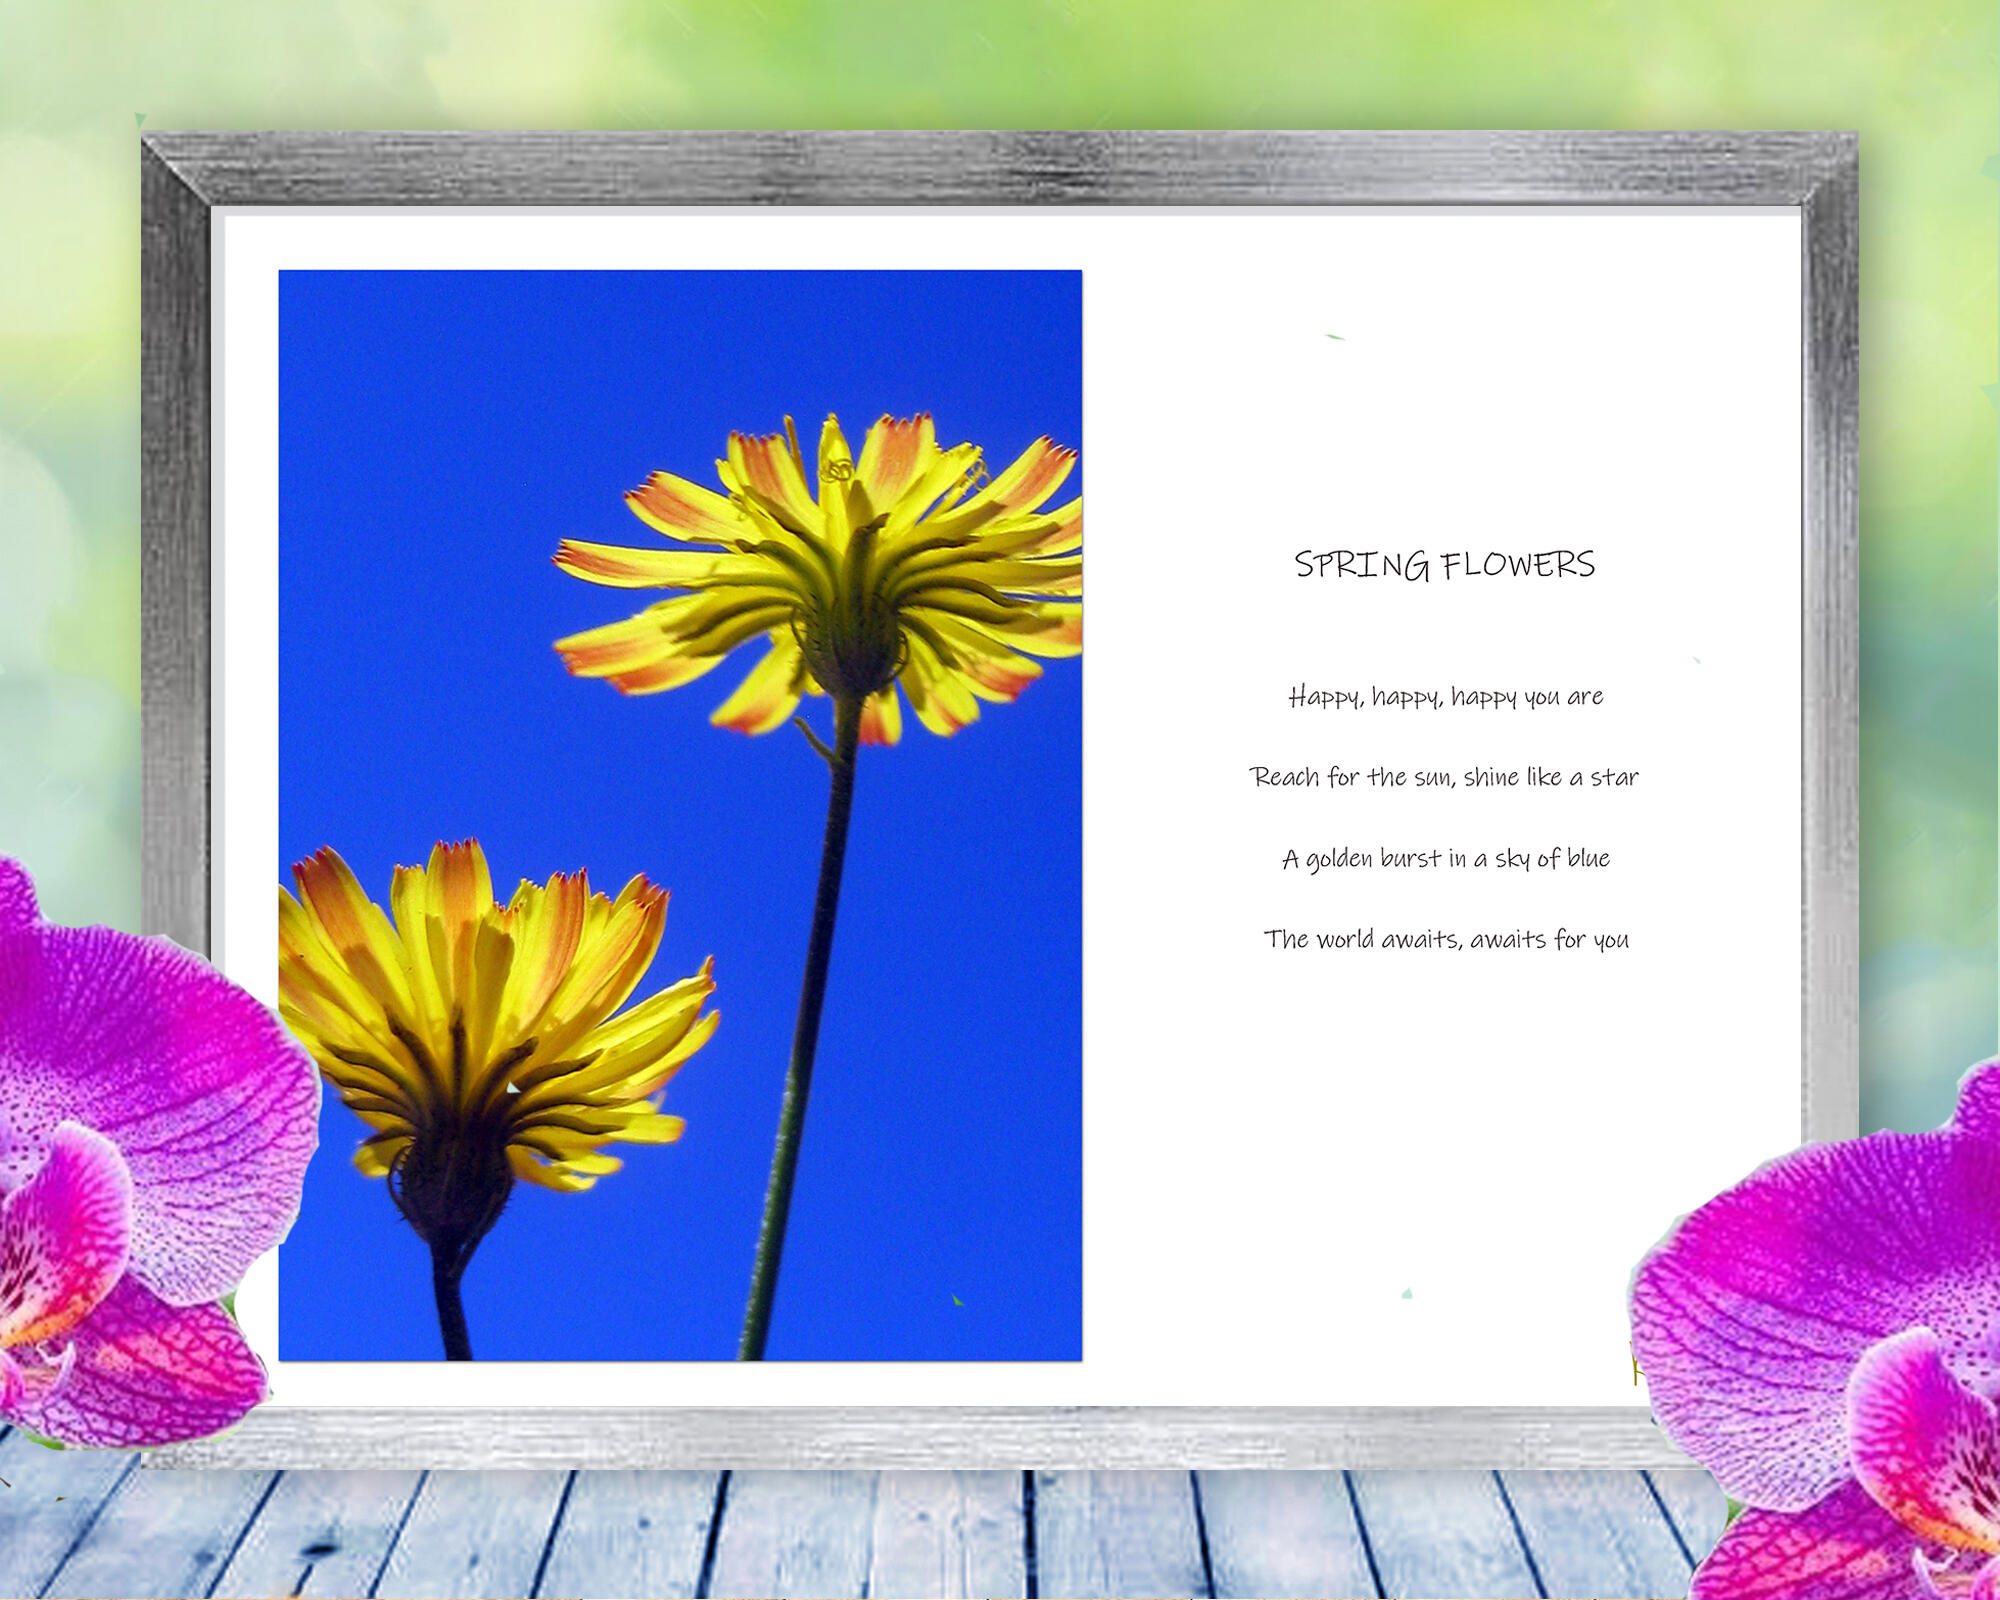 Dandelions dance against a bright blue sky in this happy, positive, nature print with poem - Spring Flowers - by The Poetry of Nature